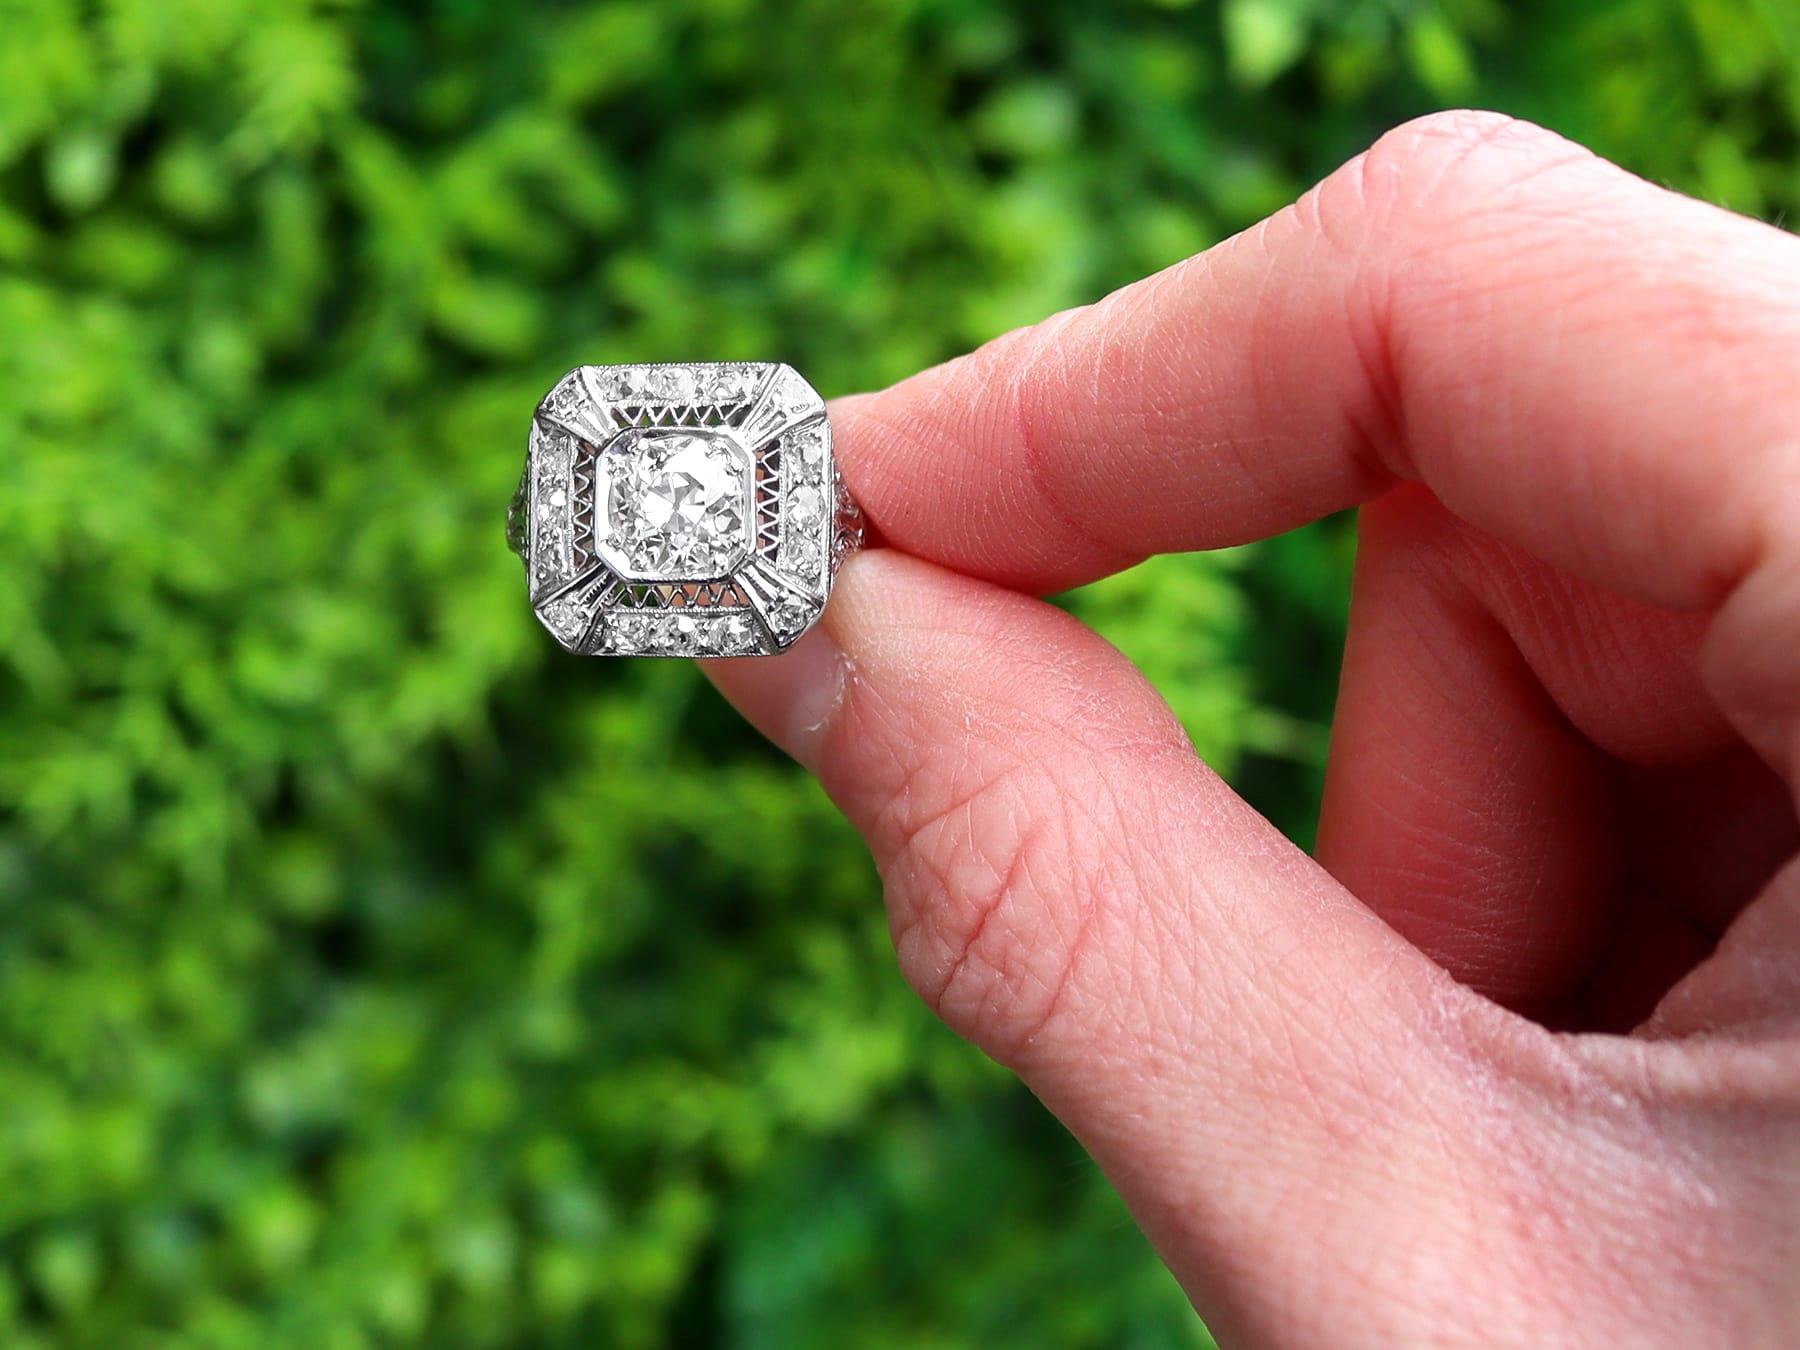 A stunning, fine and impressive antique 1.80 carat diamond and platinum dress ring; part of our diverse jewellery and estate jewelry collections.

This stunning antique 1930s diamond dress ring has been crafted in platinum.

The pierced decorated